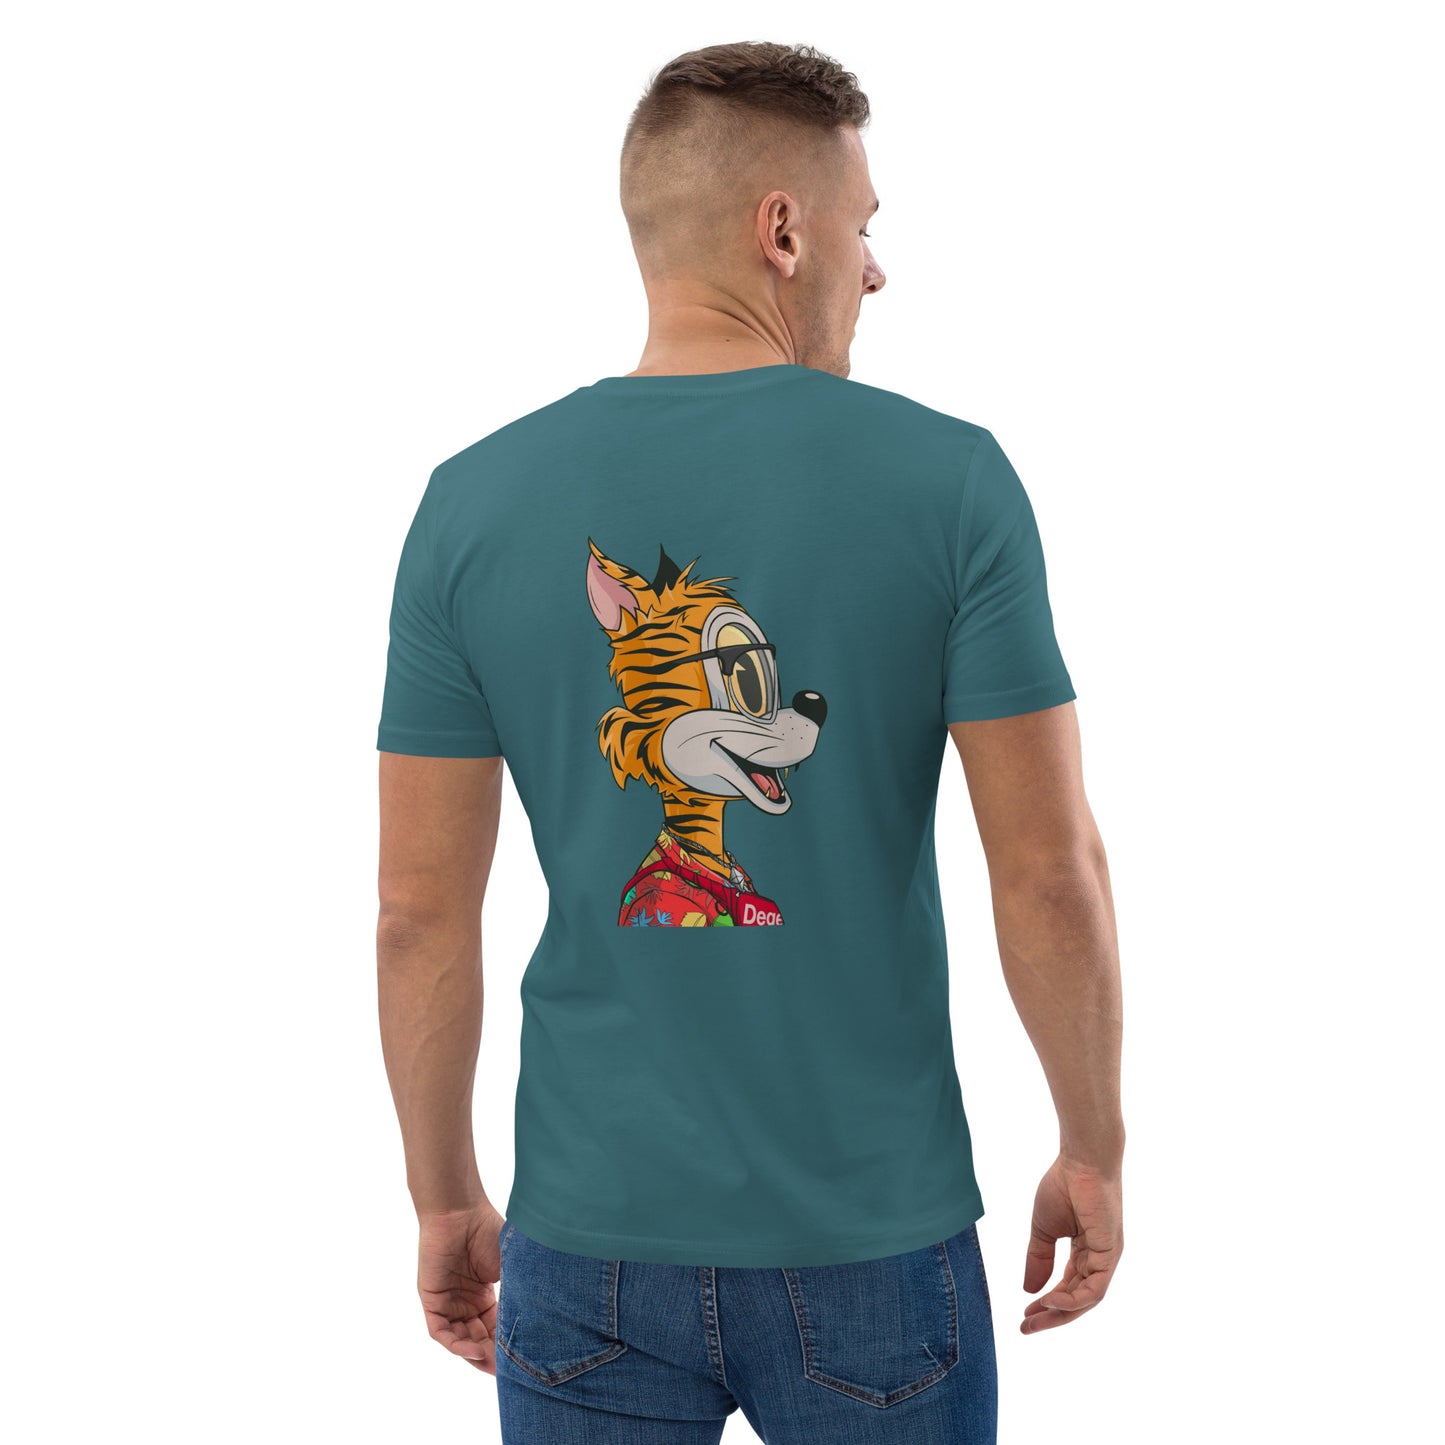 Unisex organic cotton t-shirt feat TOON #918 (front embroidered + rear print)